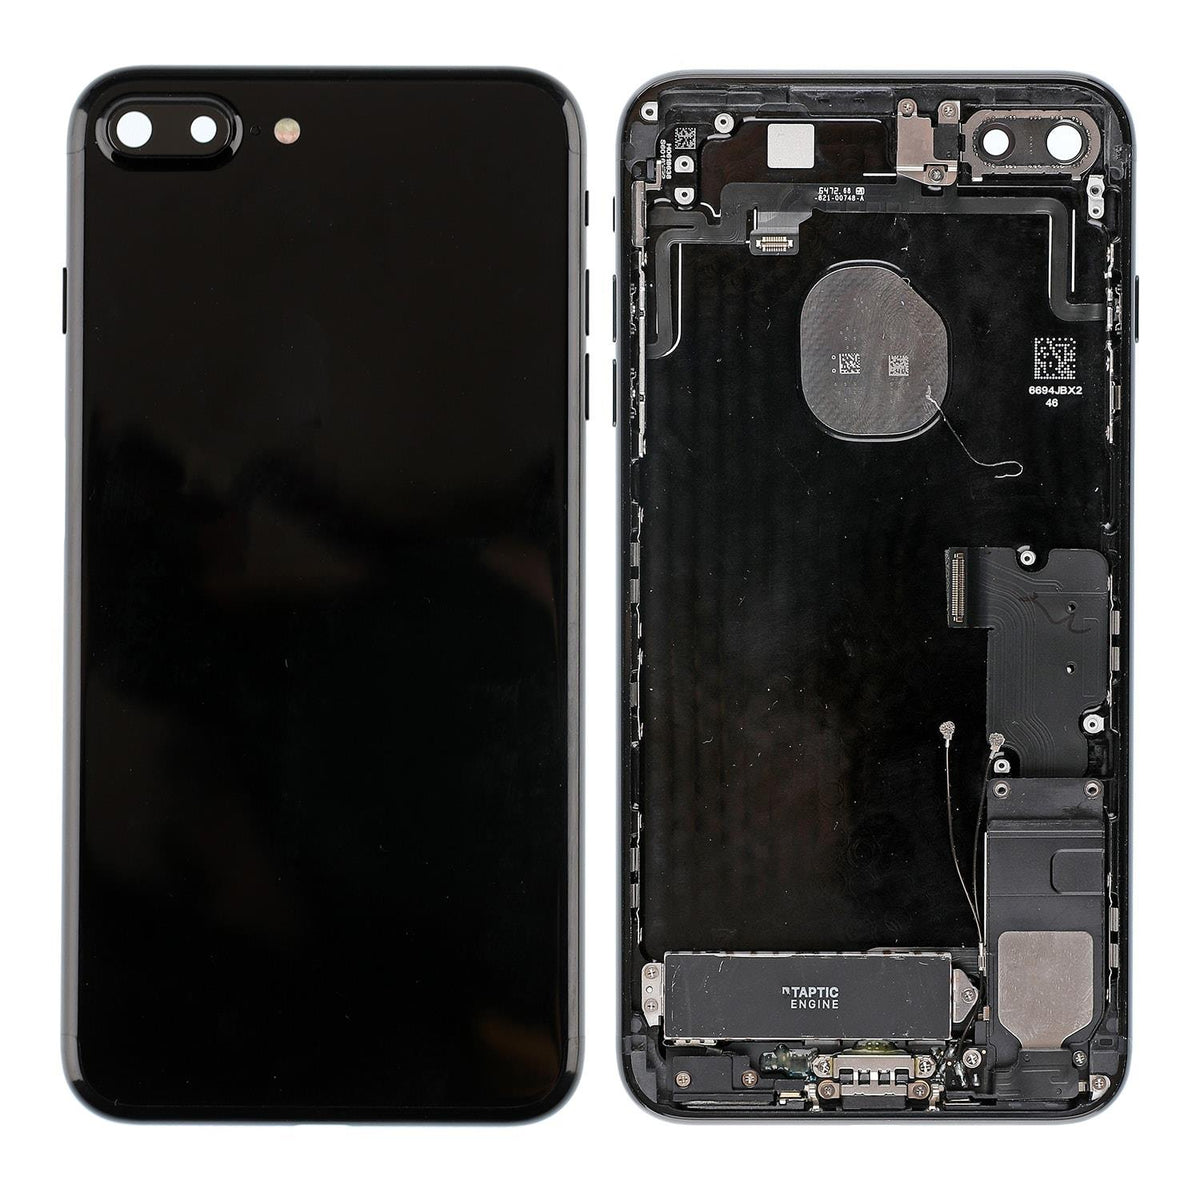 JET BLACK BACK COVER FULL ASSEMBLY FOR IPHONE 7 PLUS